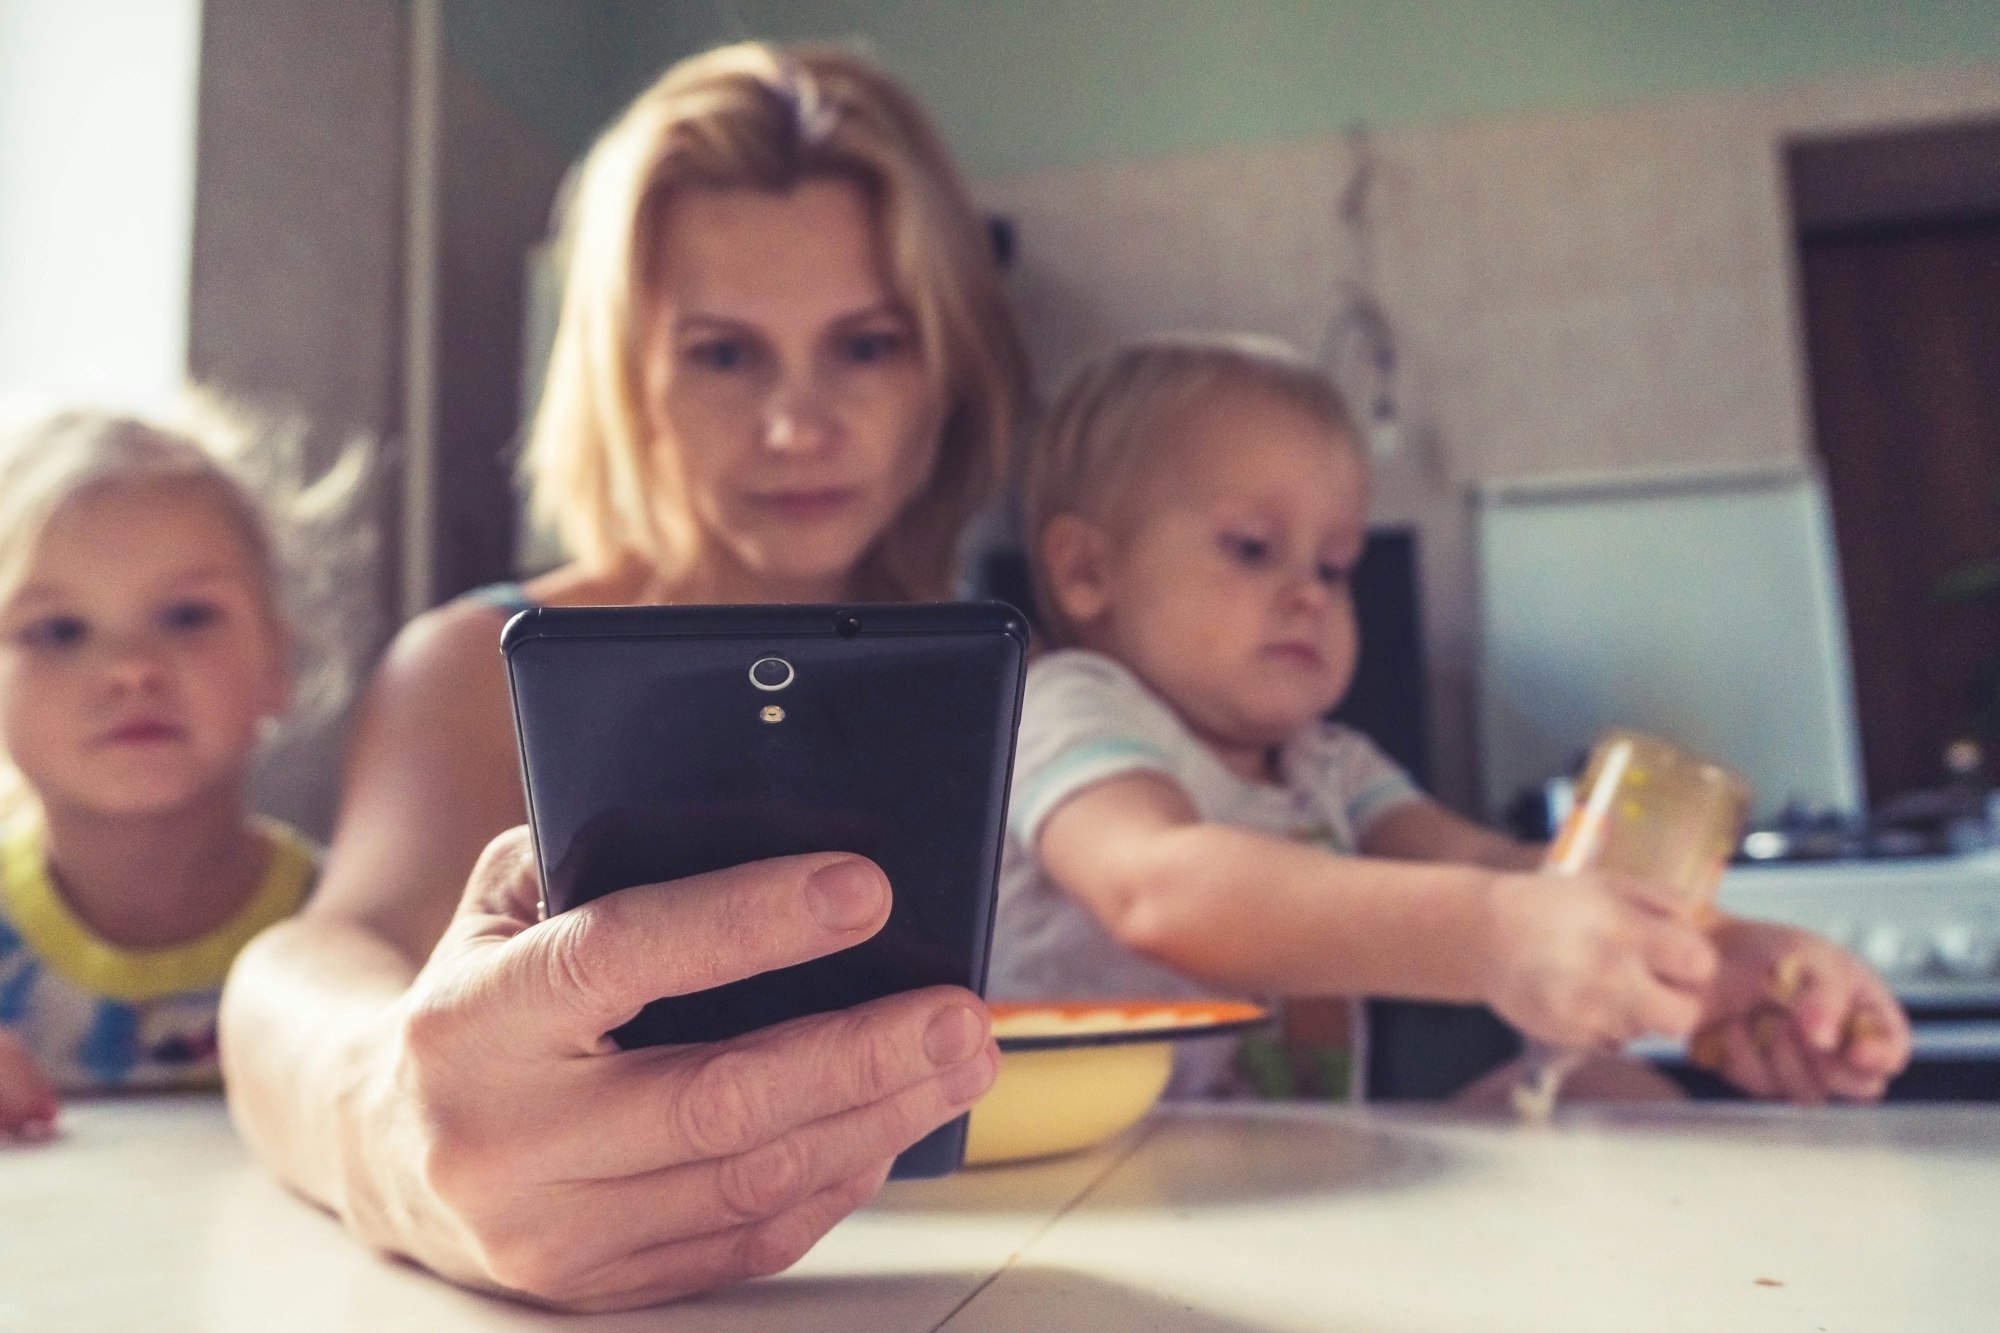 A woman works on smartphone while sitting with children